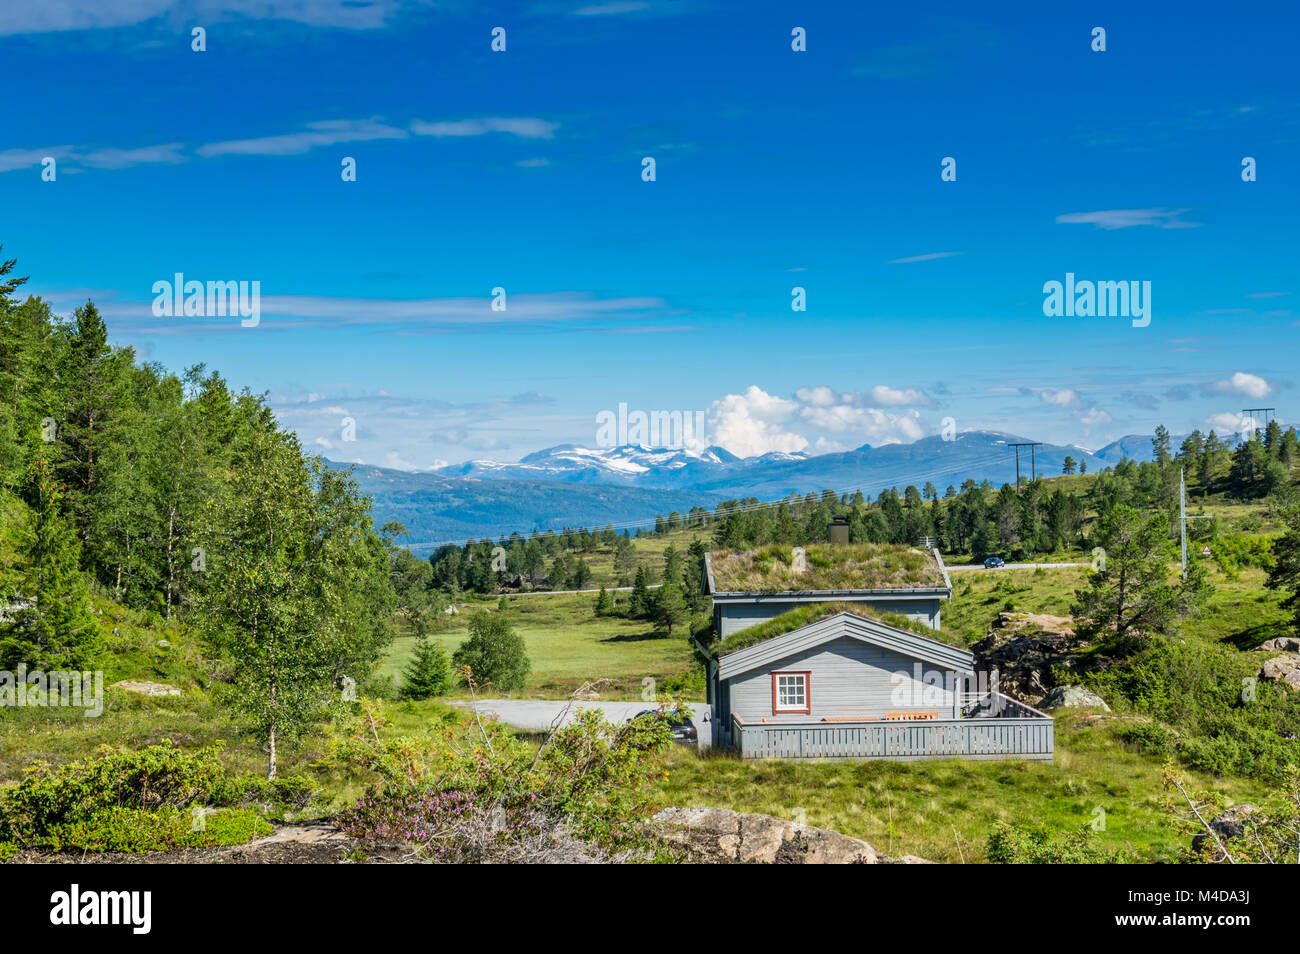 Summer landscape in Norway Stock Photo